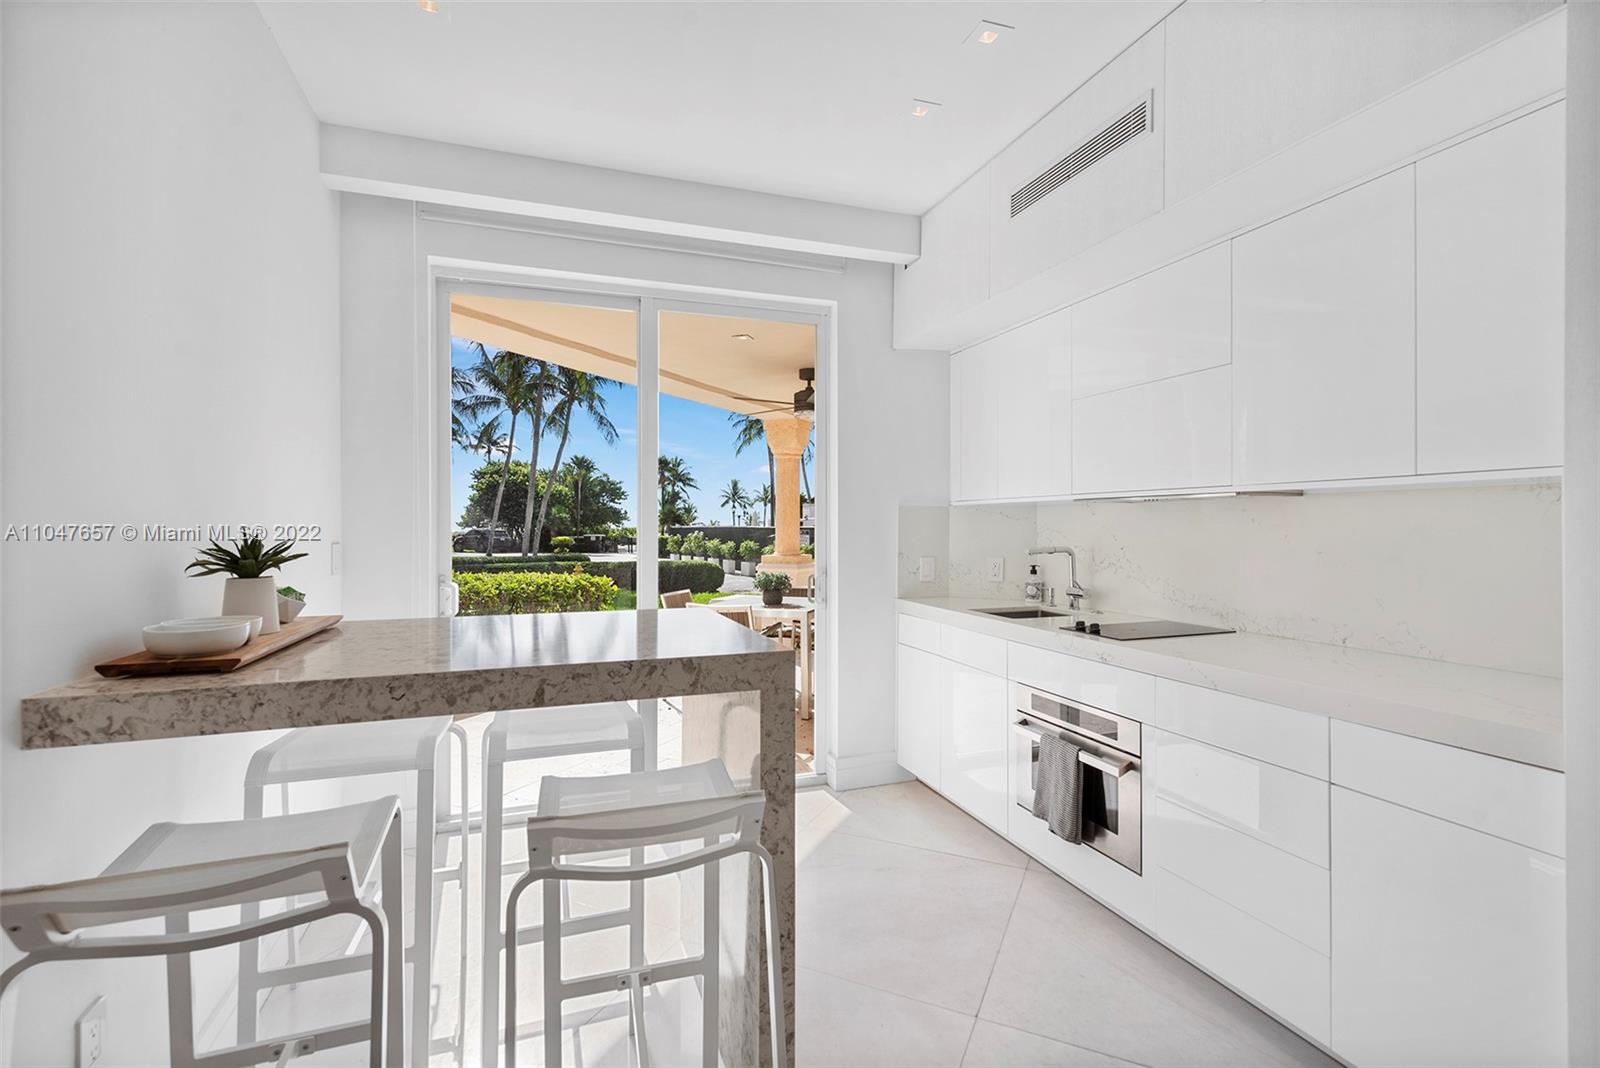 15512  Fisher Island Dr #15512 For Sale A11047657, FL